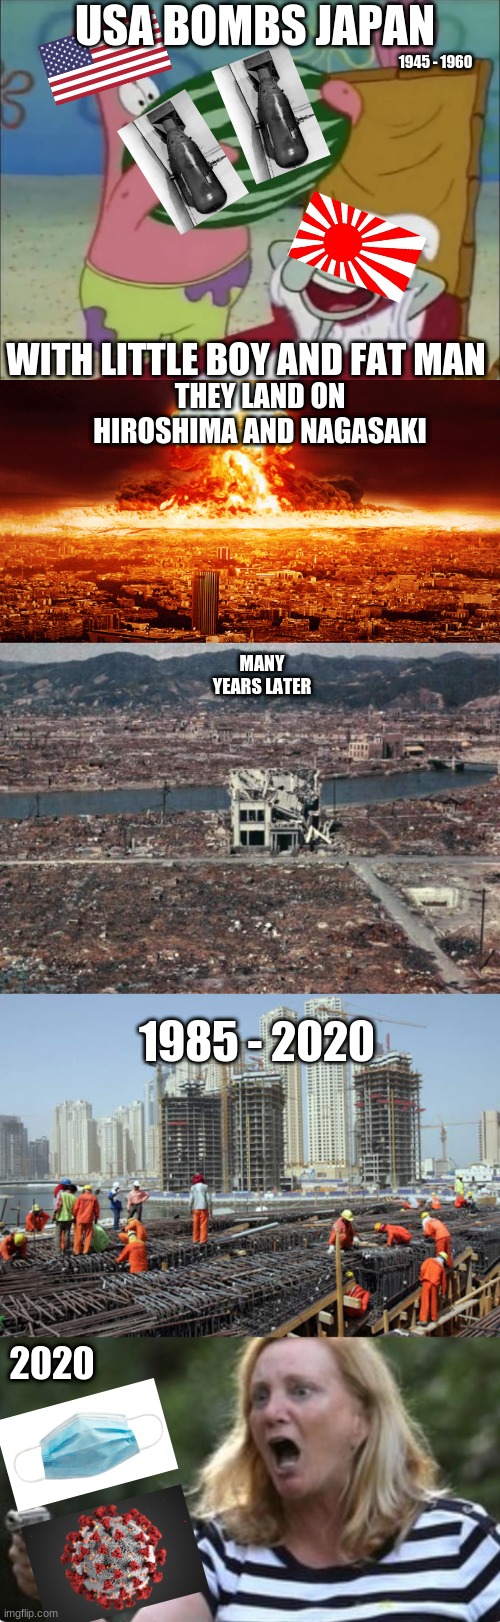 1945 - 2020 | USA BOMBS JAPAN; 1945 - 1960; WITH LITTLE BOY AND FAT MAN; THEY LAND ON HIROSHIMA AND NAGASAKI; MANY YEARS LATER; 1985 - 2020; 2020 | image tagged in squidward watermelon | made w/ Imgflip meme maker